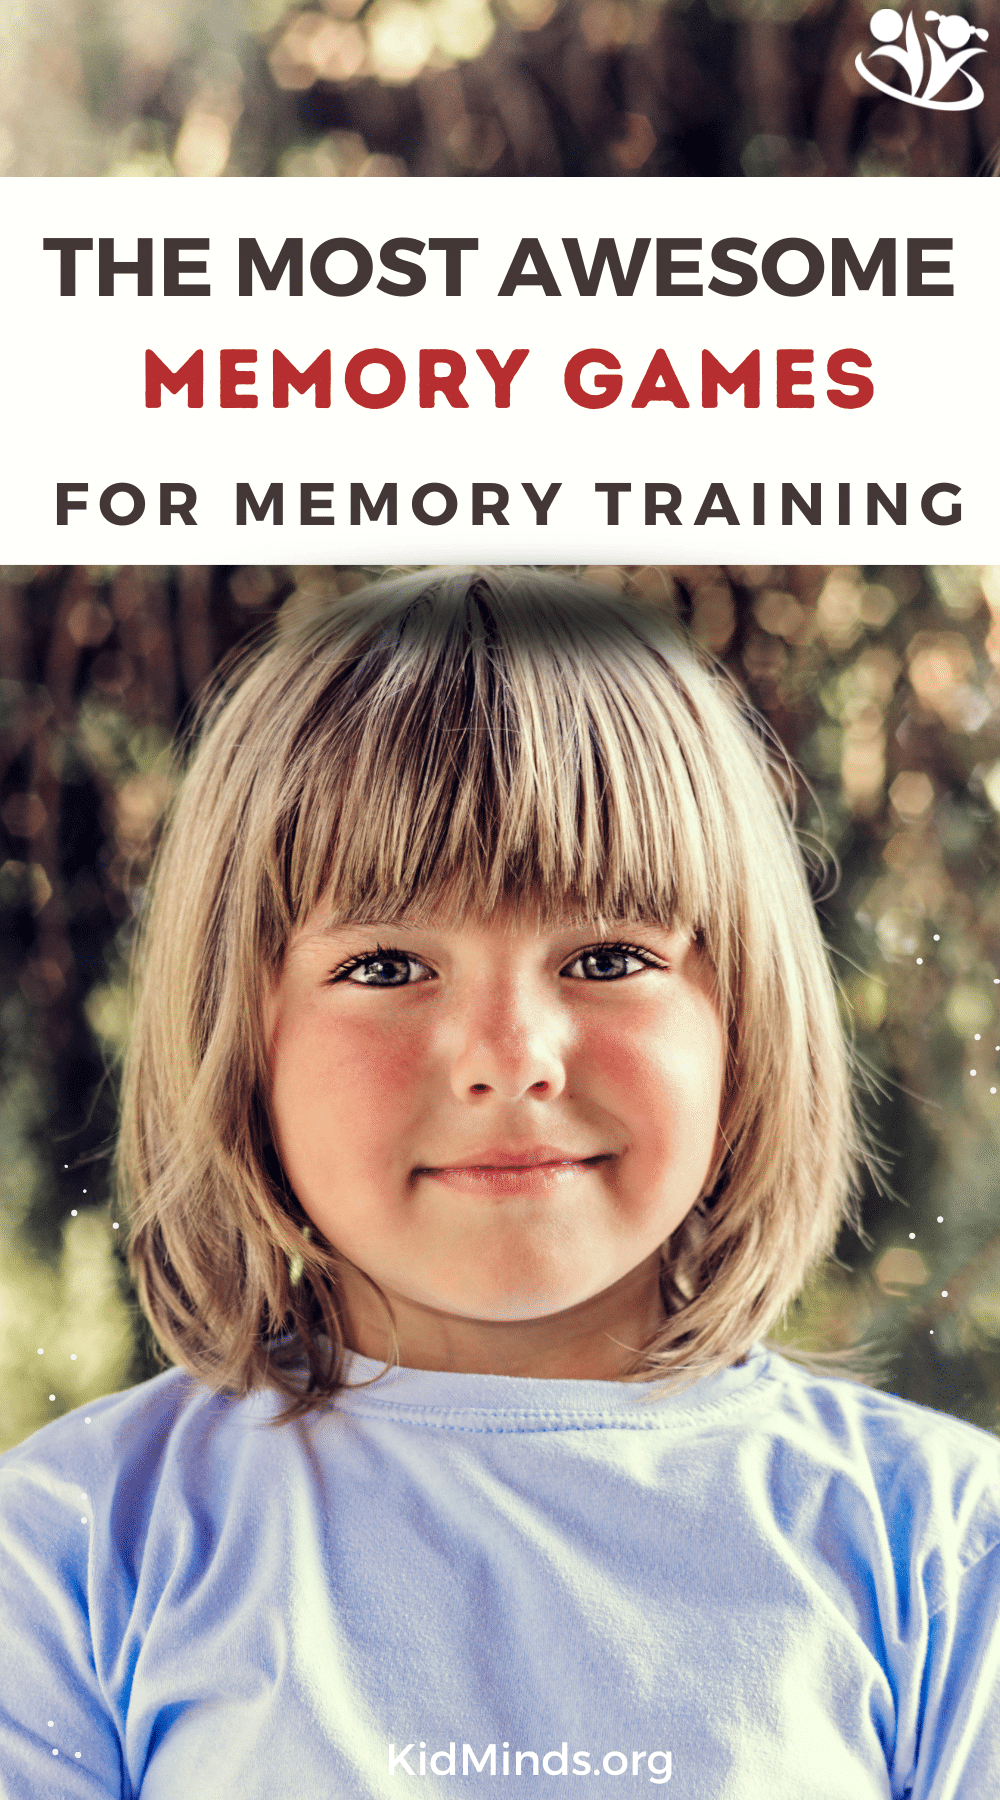 Do you want to enhance your kids’ memory and overall learning ability? The list of ideas below contains our favorite memory games and activities. #memorygames #childdevelopment #memorygamesforkids #braingames #learning #brainimprovement #kidsactivities #memory #bestgamesforhomeschooling #kidminds #playandlearn